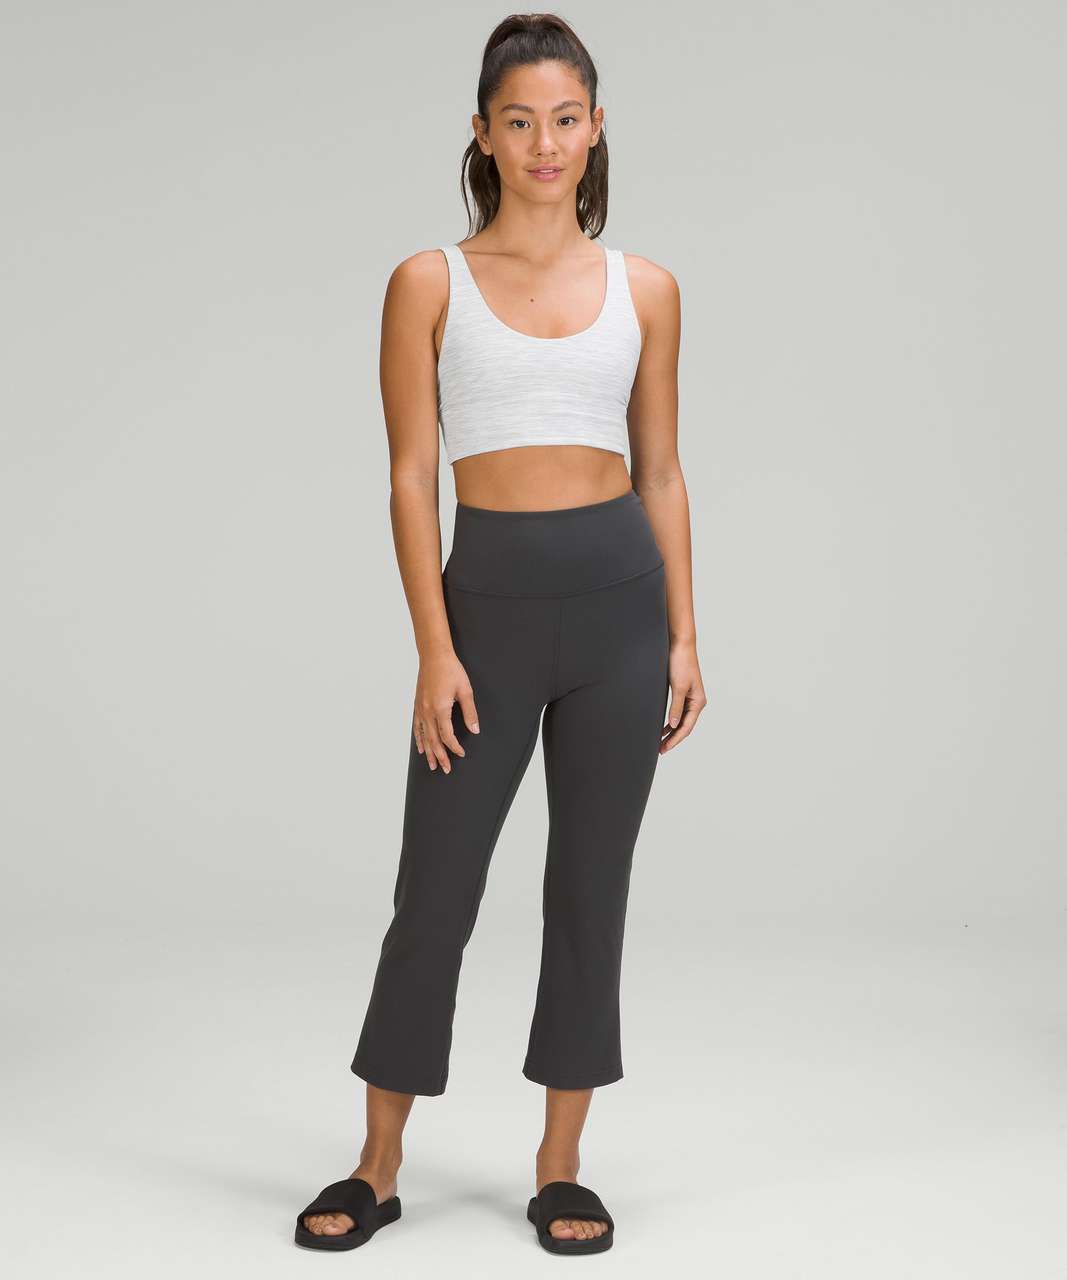 Lululemon Align Bra *Light Support, A/B Cup - Wee Are From Space Nimbus Battleship / Wee Are From Space Nimbus Battleship